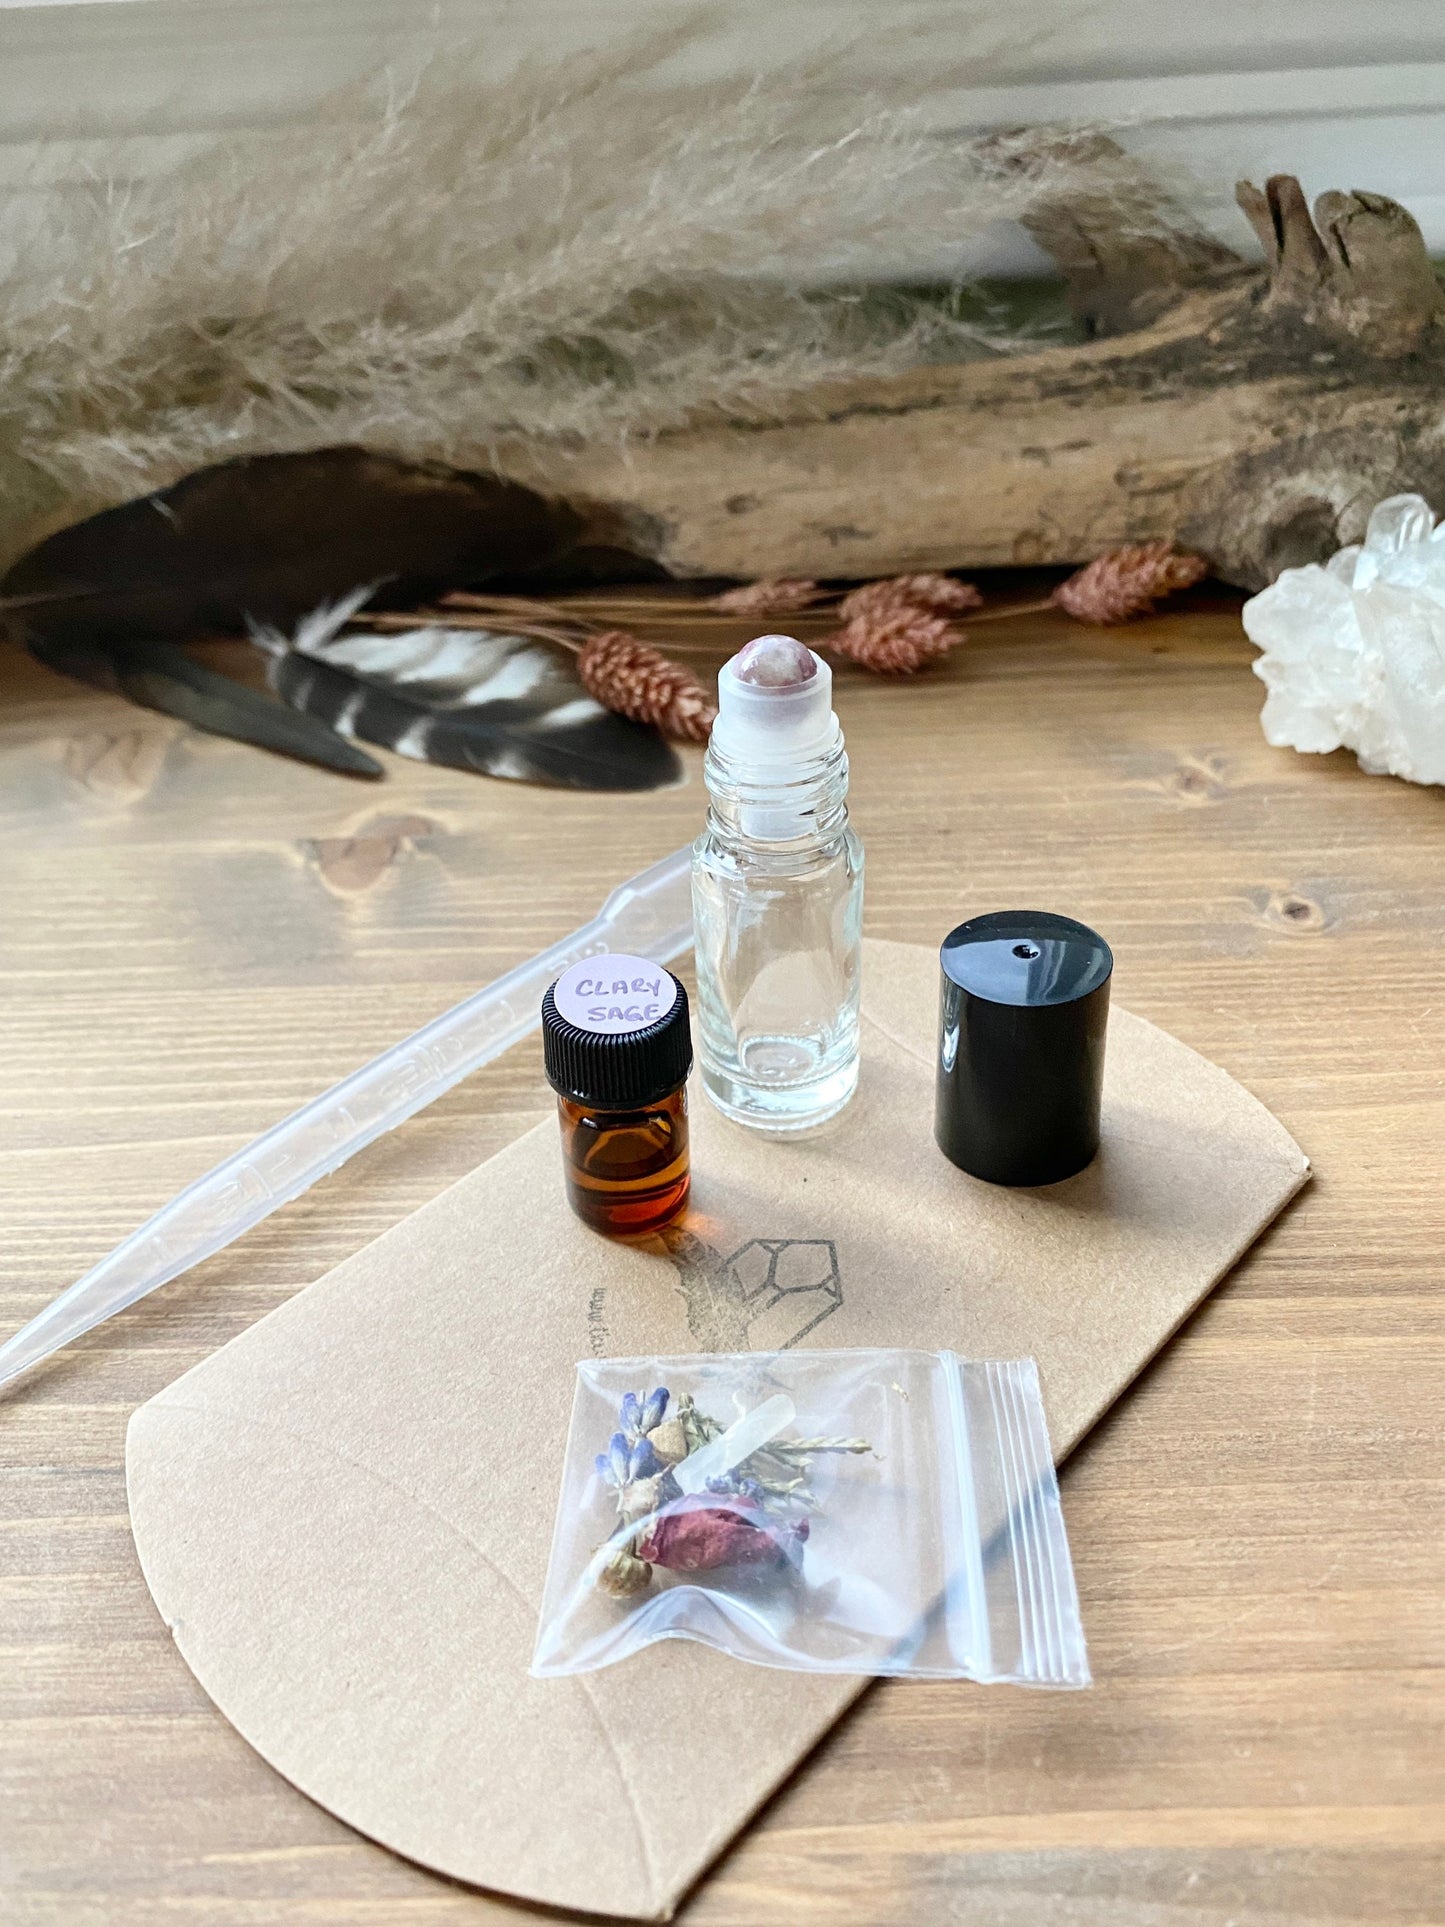 DIY: Aromatherapy Oil - 5ml Glass Bottle with Lepidolite Gemstone Roller and Clary Sage Essential Oil with Quartz Crystal & Dried Flowers